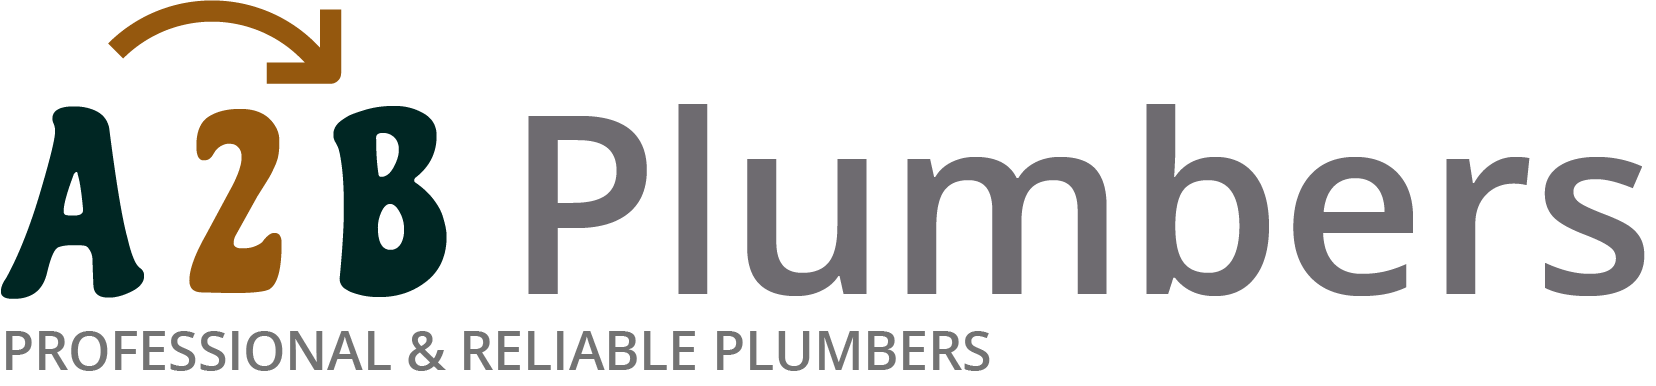 If you need a boiler installed, a radiator repaired or a leaking tap fixed, call us now - we provide services for properties in Wombwell and the local area.